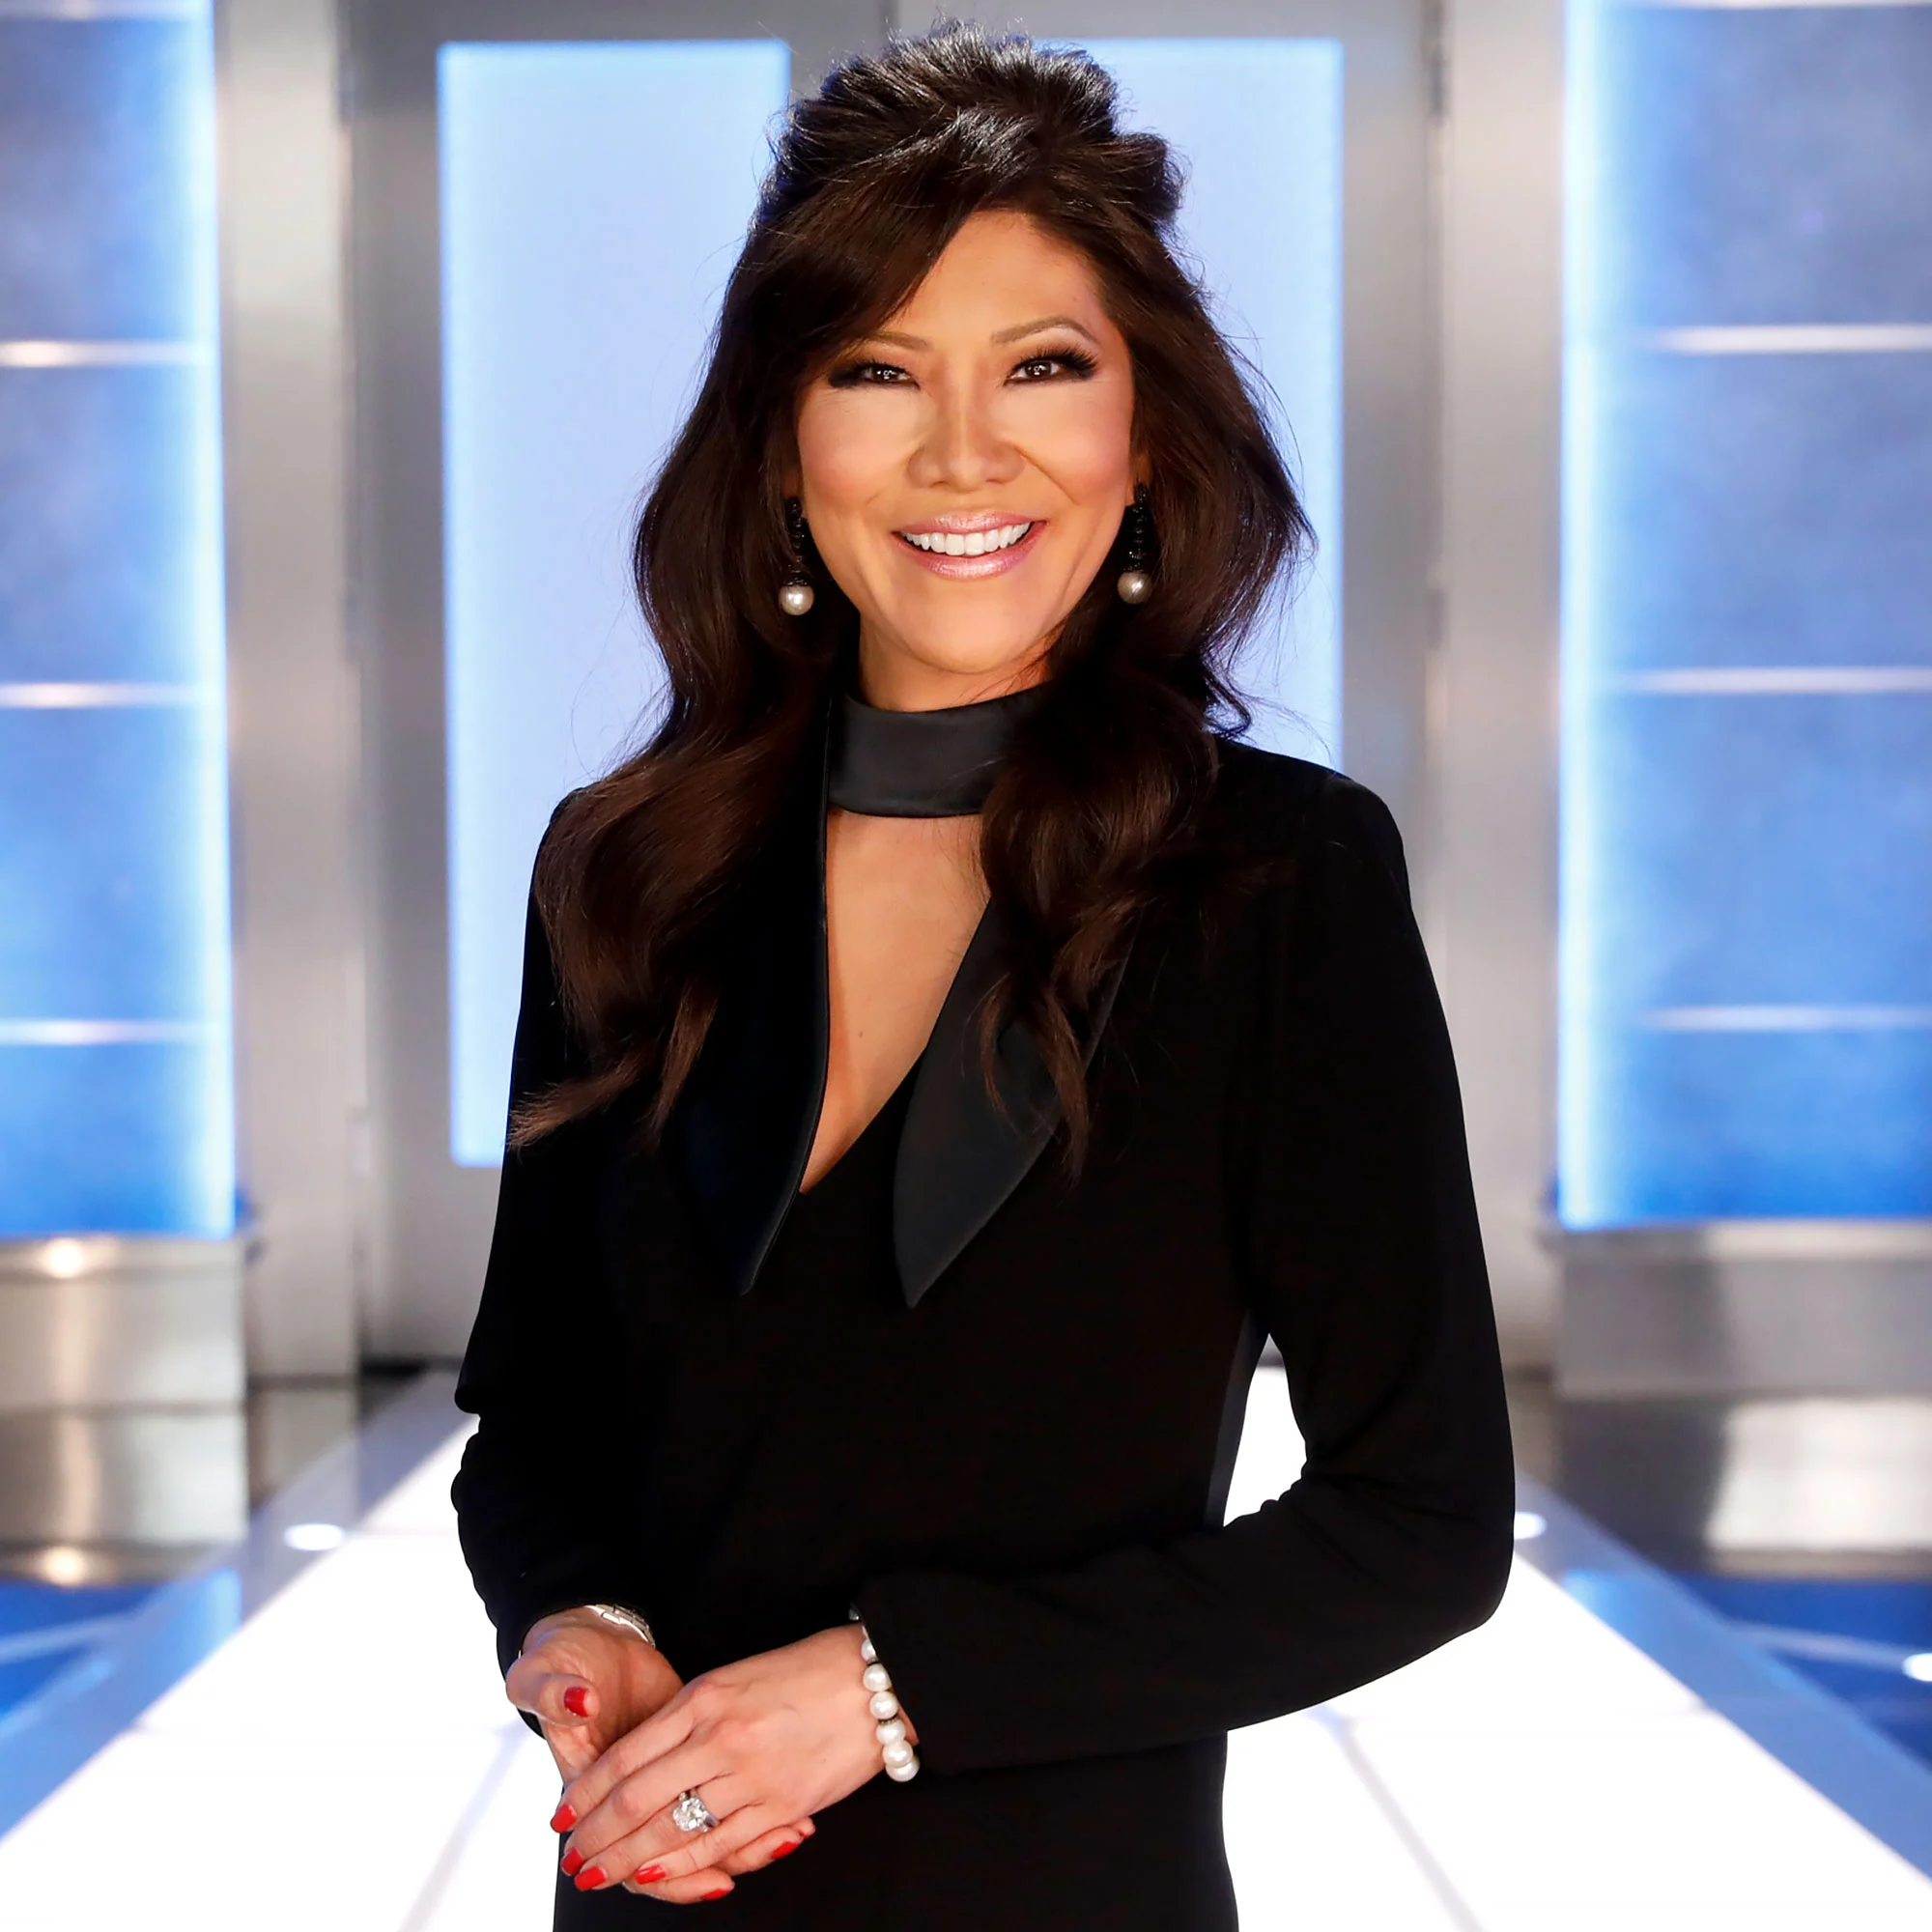 What is Julie Chen Moonves’ personal life like